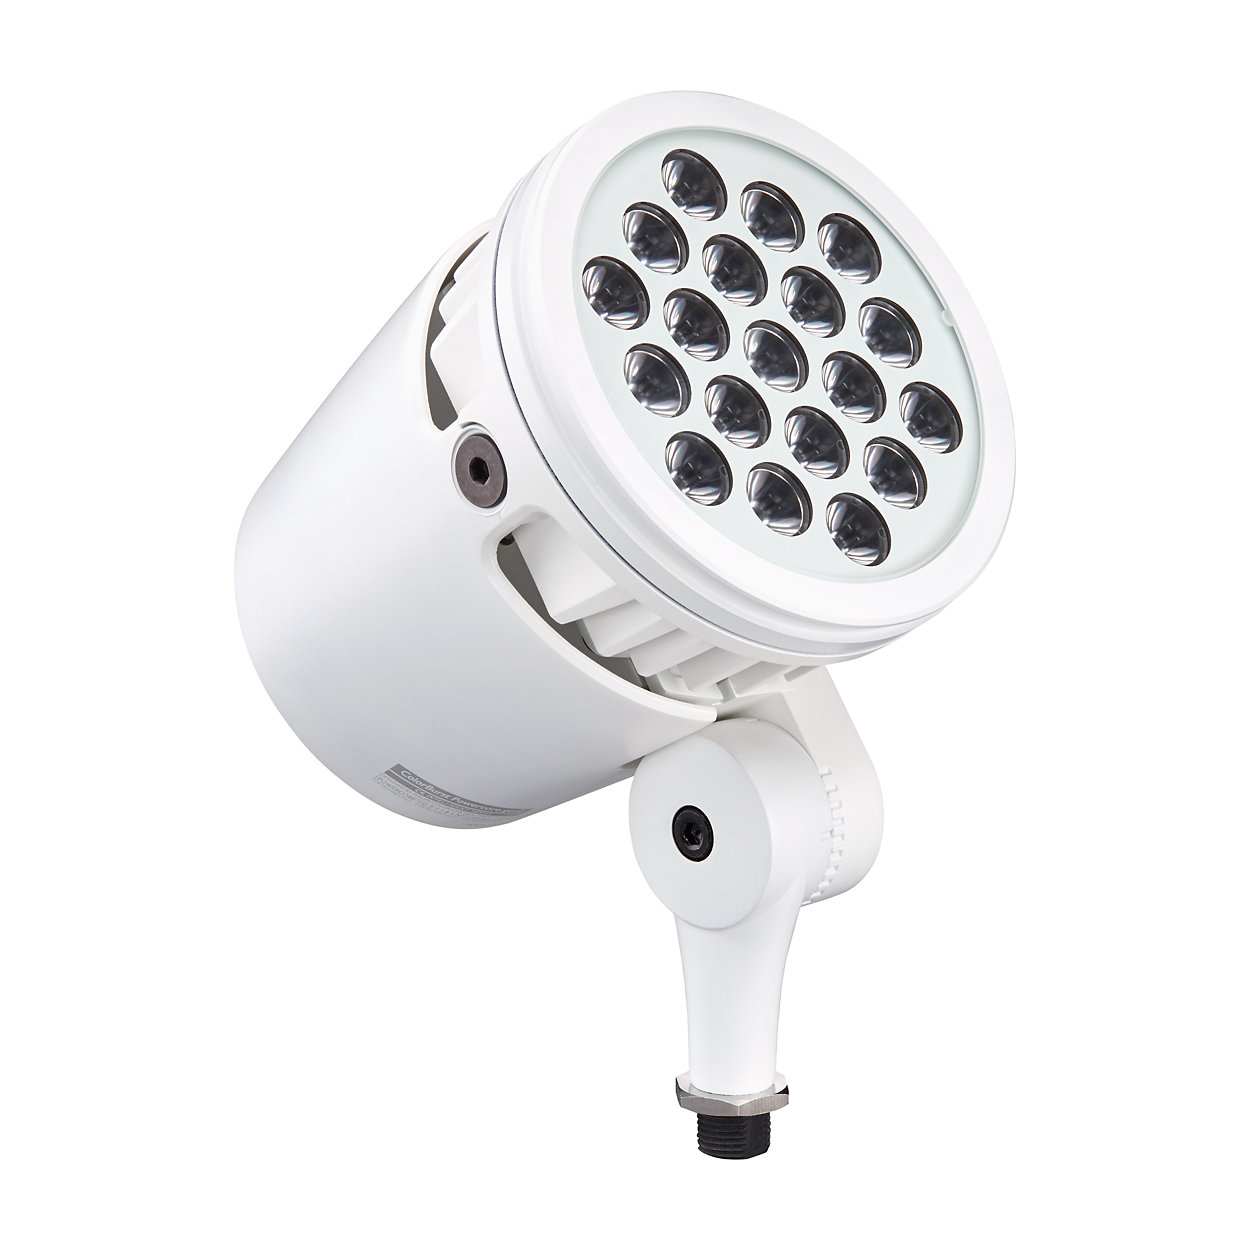 Architectural and Landscape LED spotlight with intelligent color light